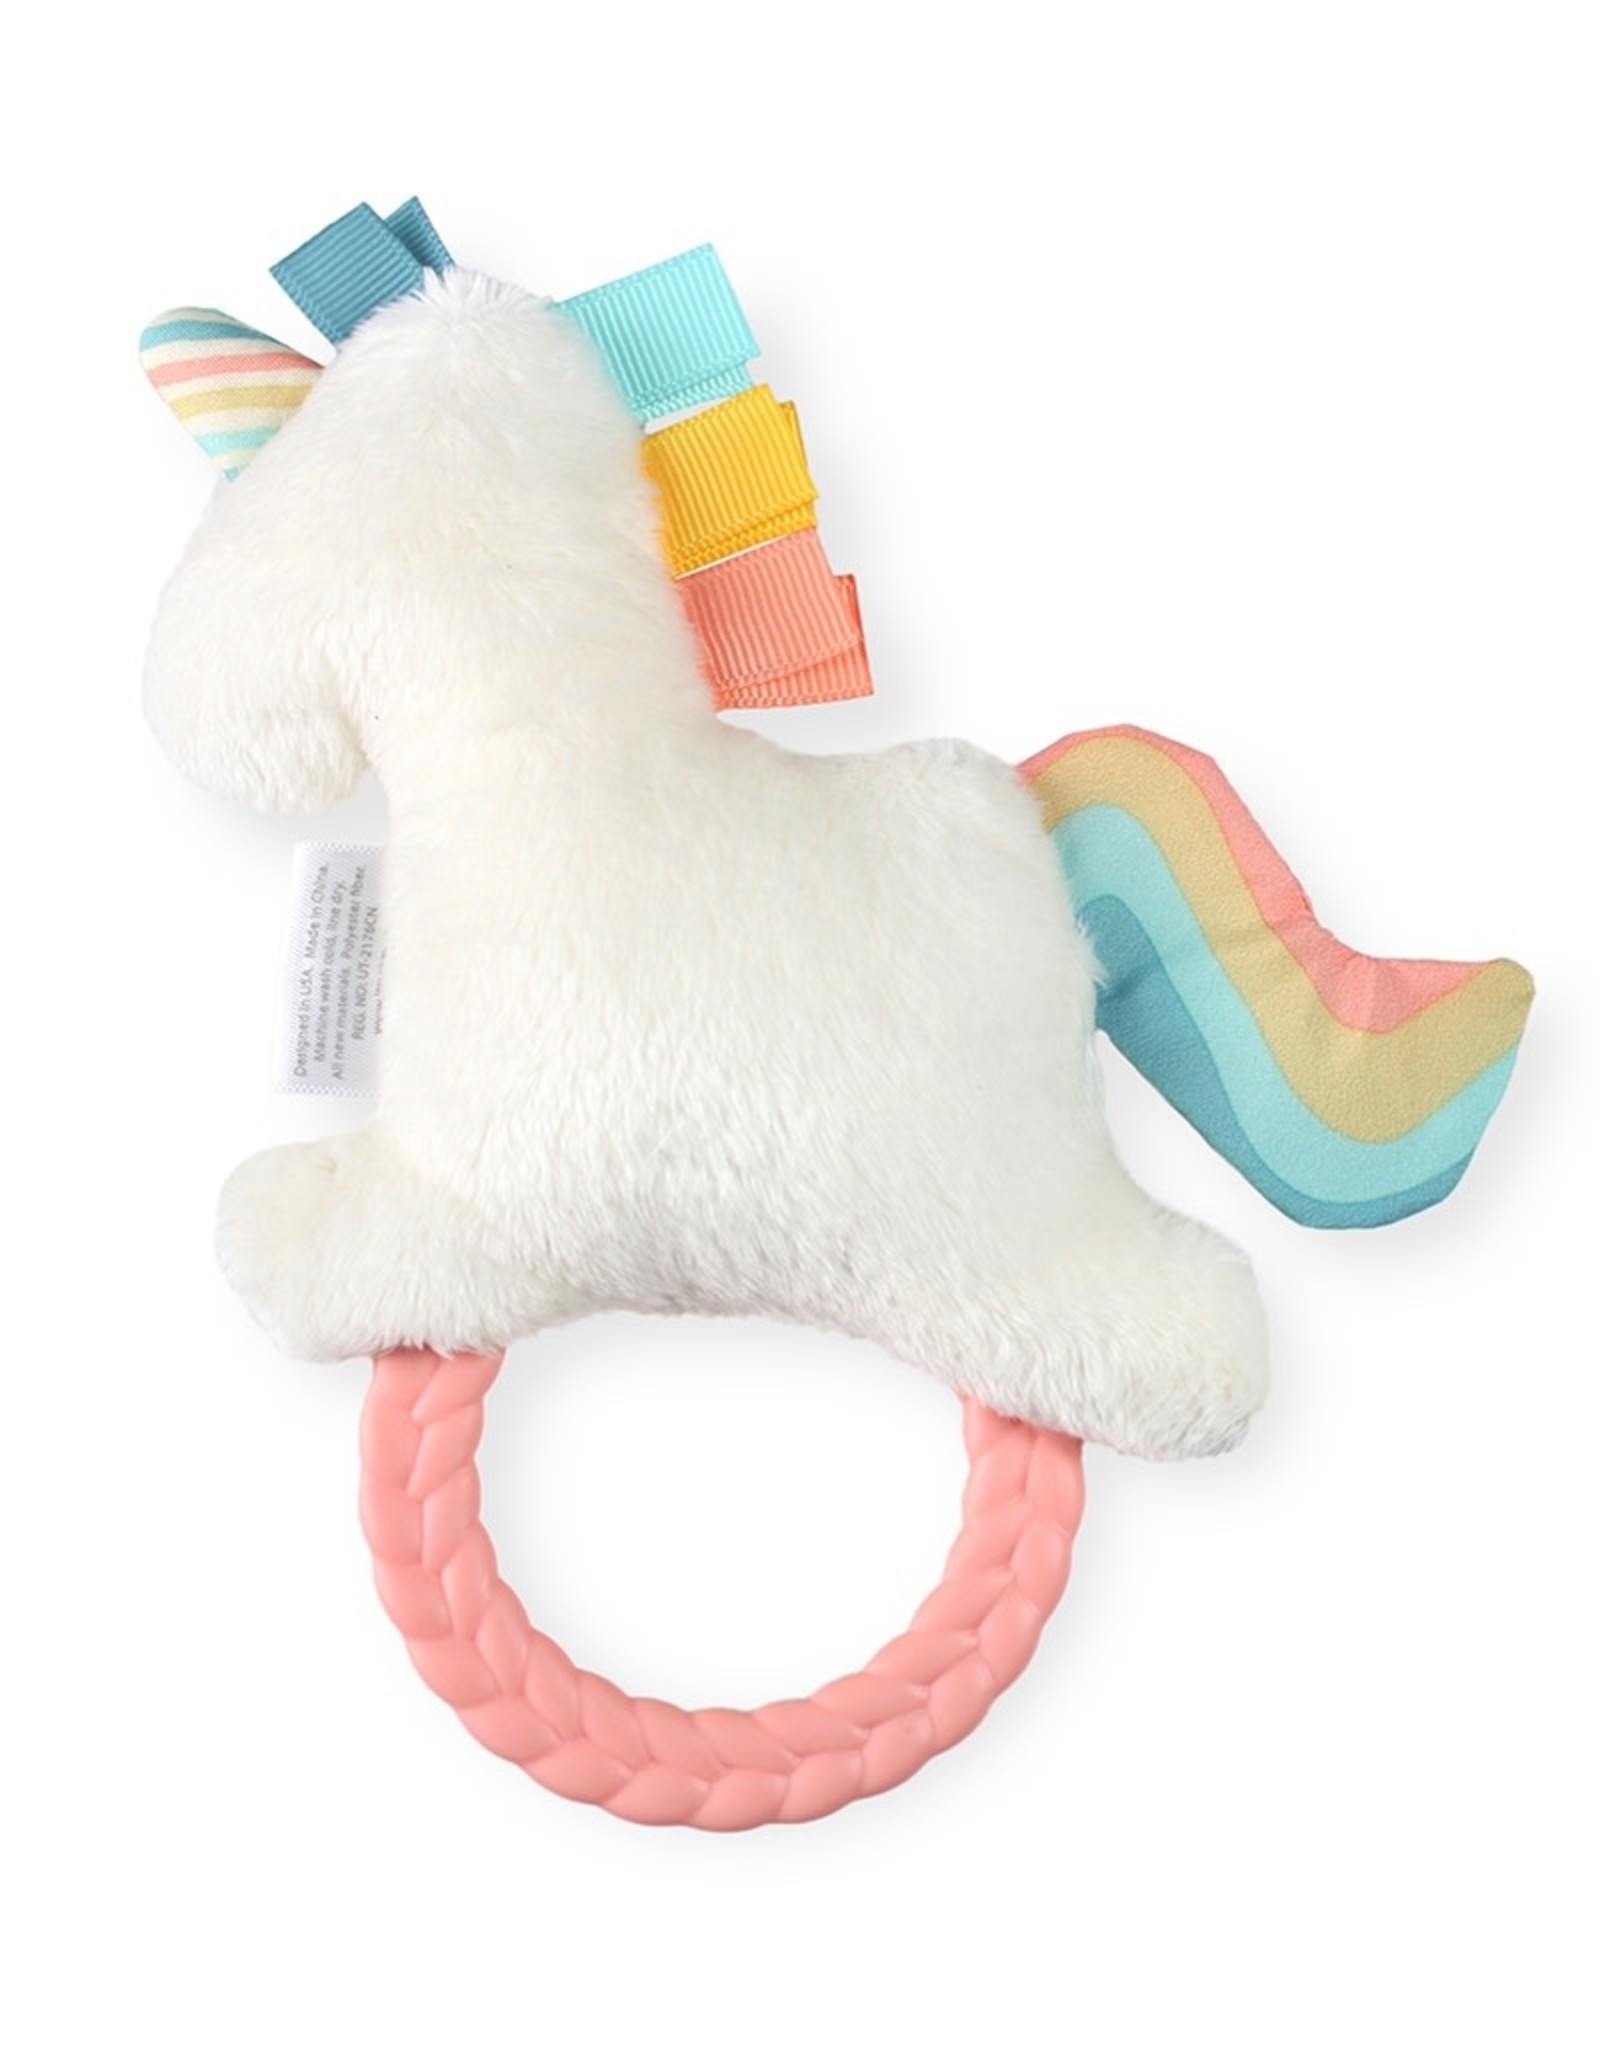 Itzy Ritzy Ritzy Rattle Pal™ Plush Rattle Pal with Teether - Unicorn